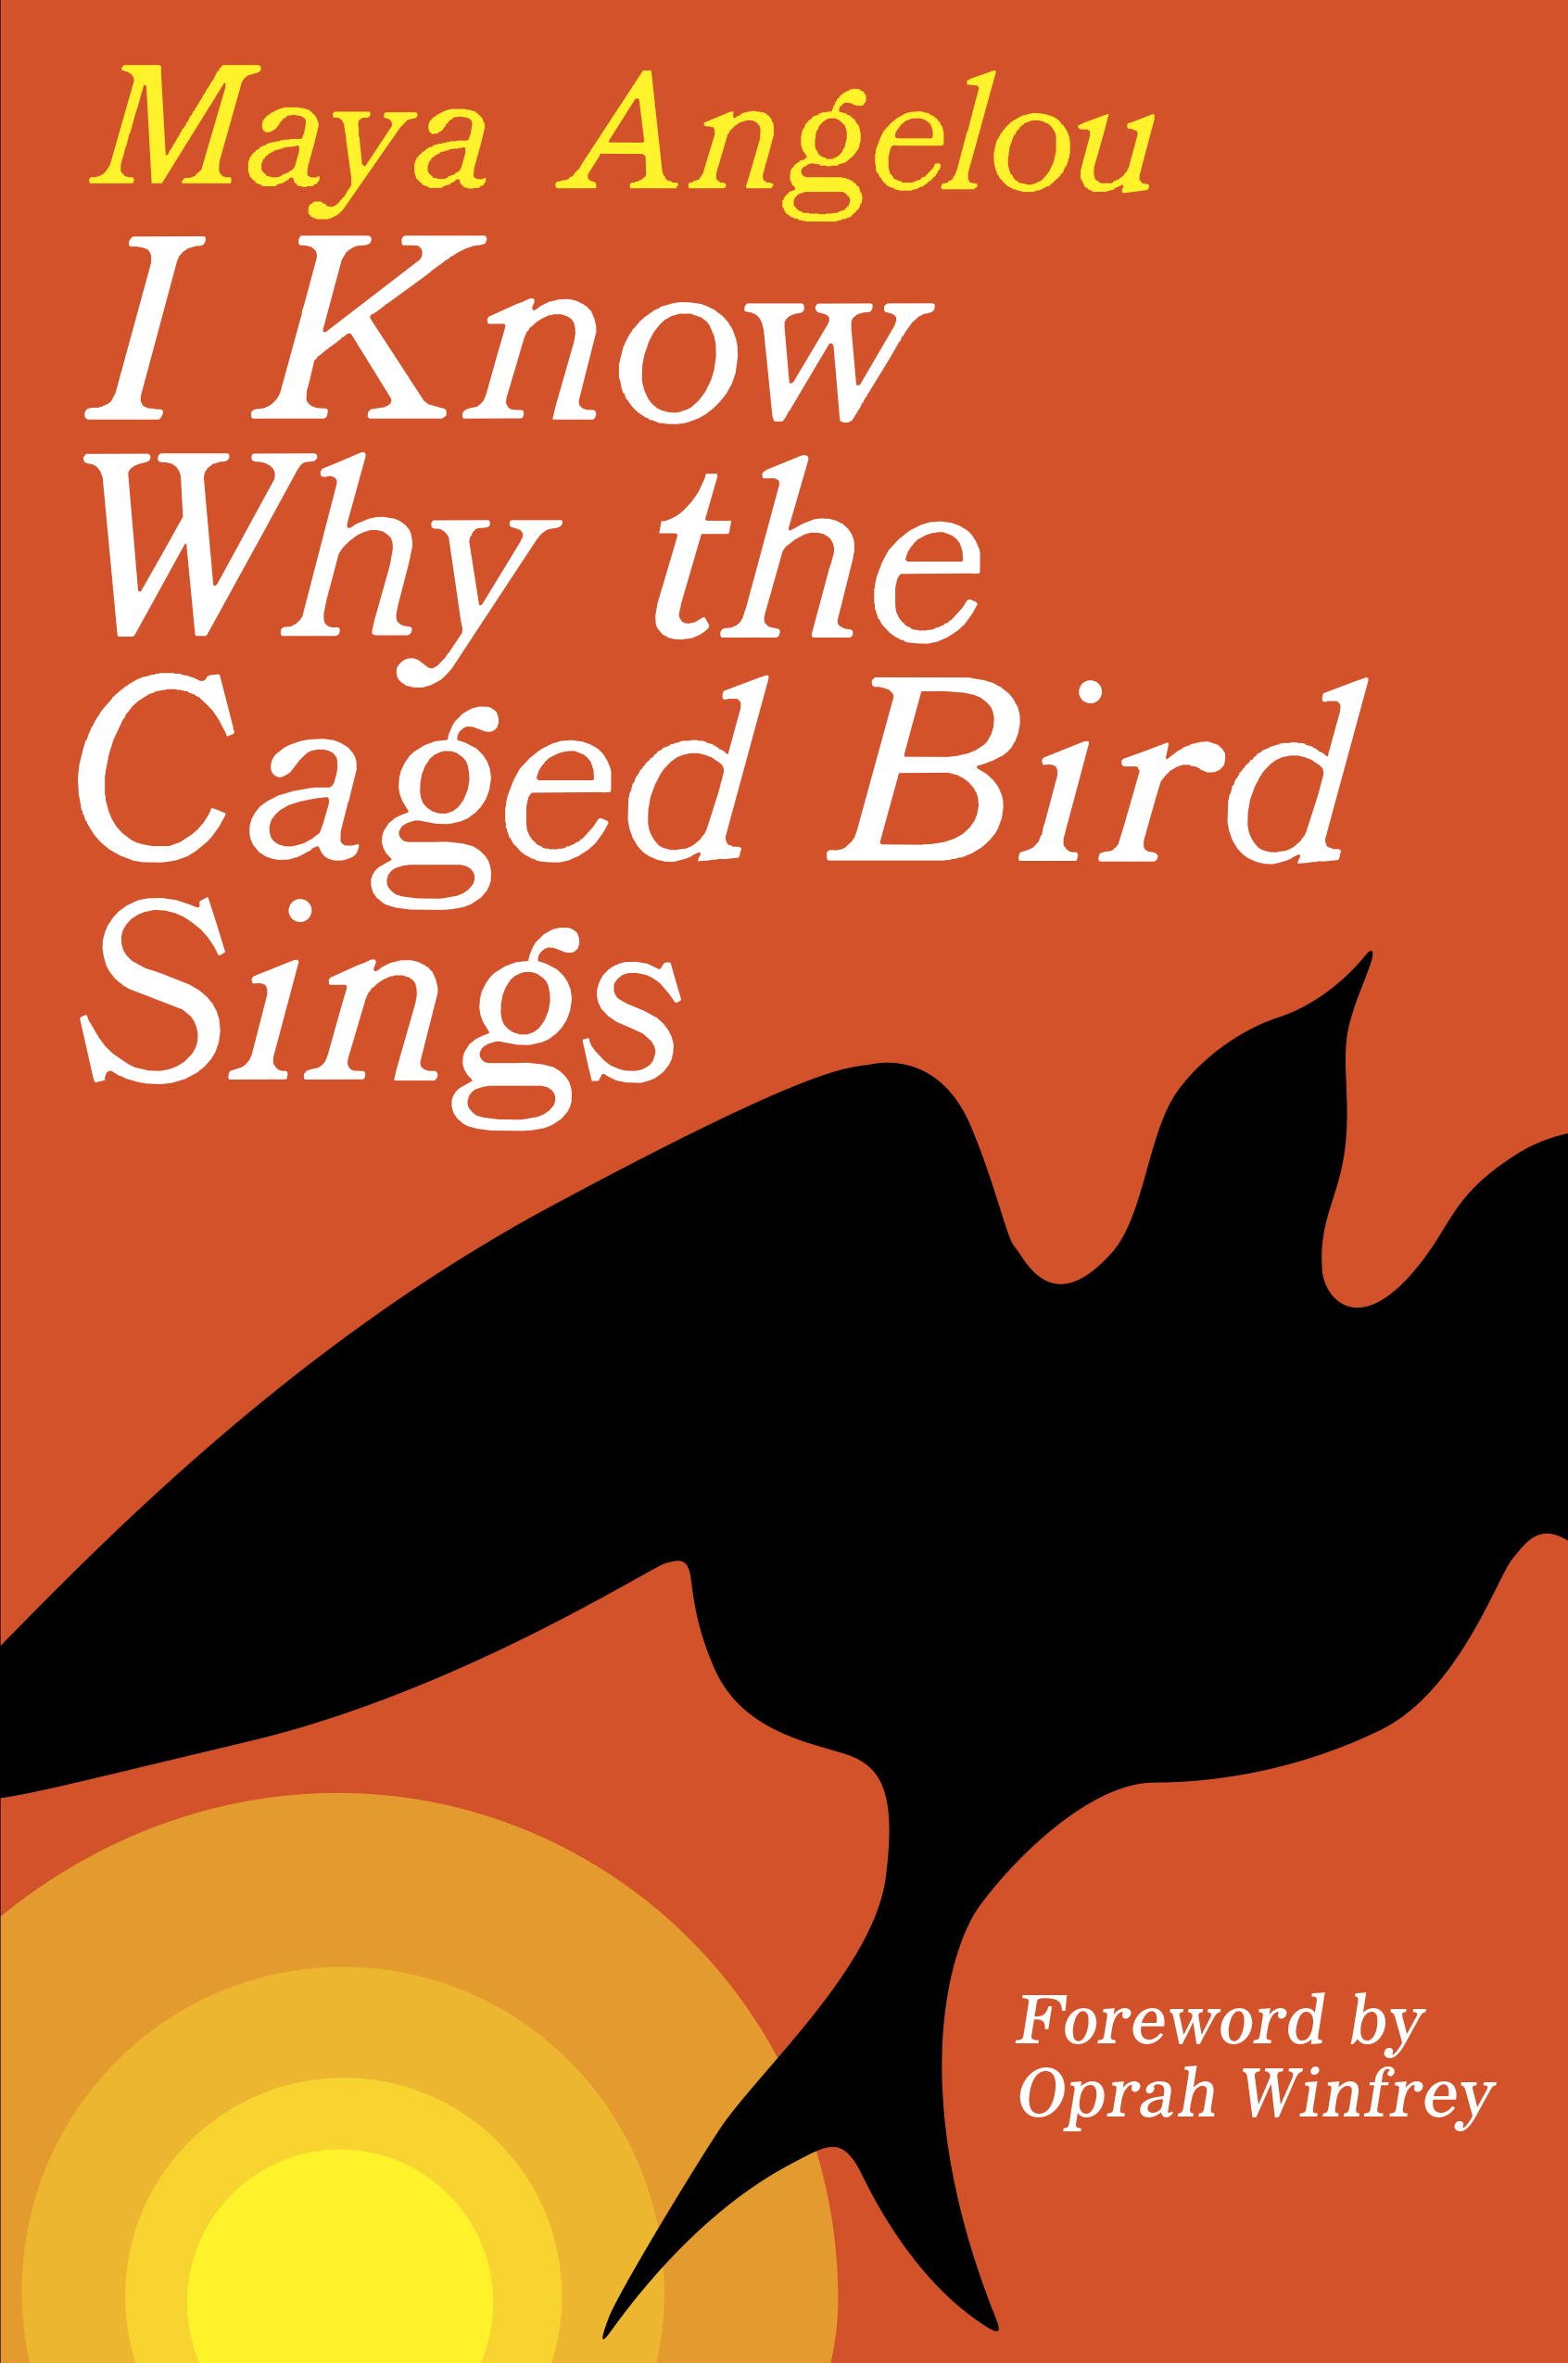 I Know Why the Caged Bird Sings (eBook) by Maya Angelou $1.99